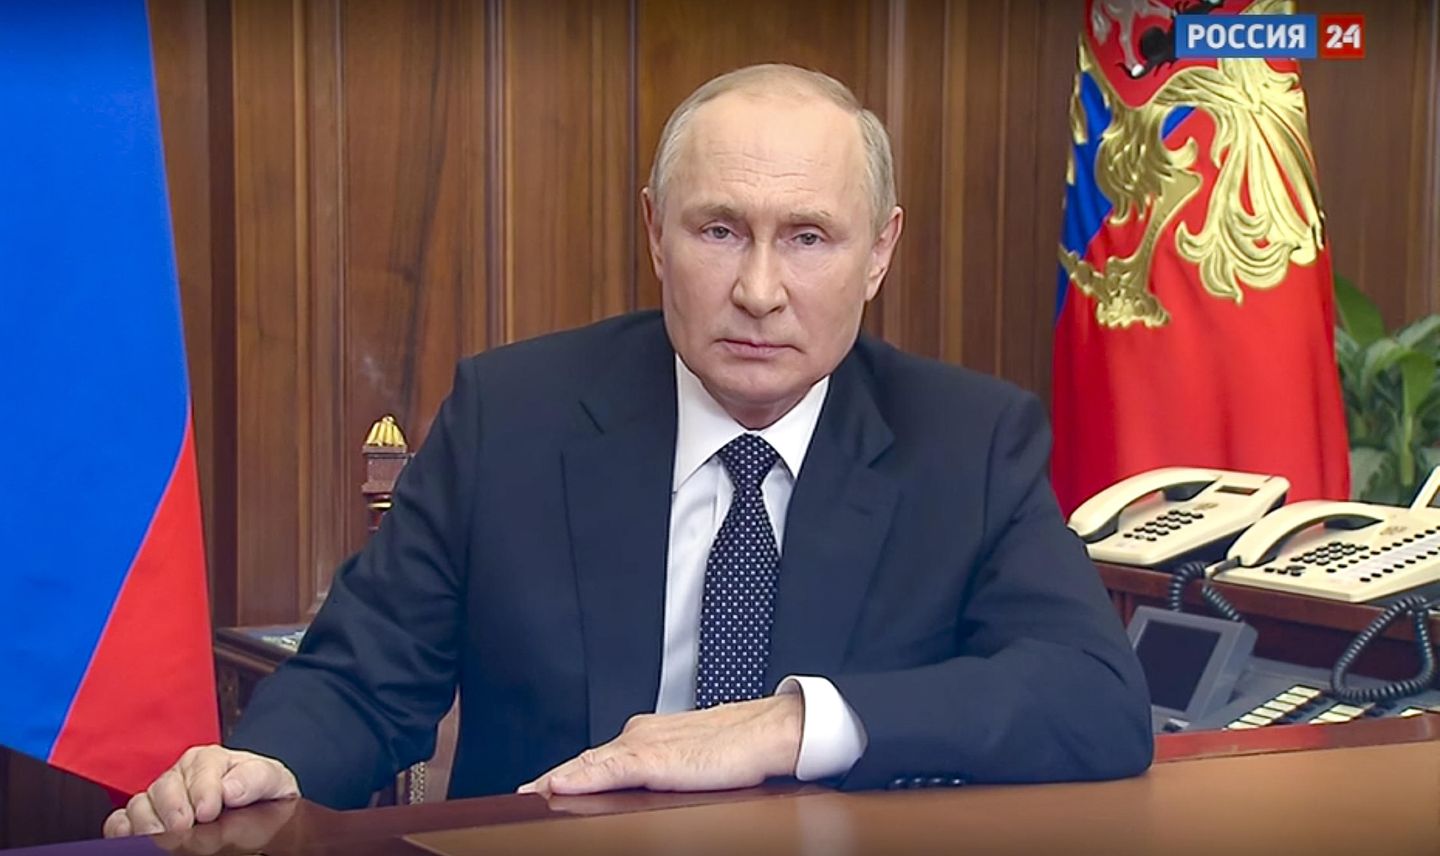 Putin sets partial military call-up, says he won't 'bluff' on nukes